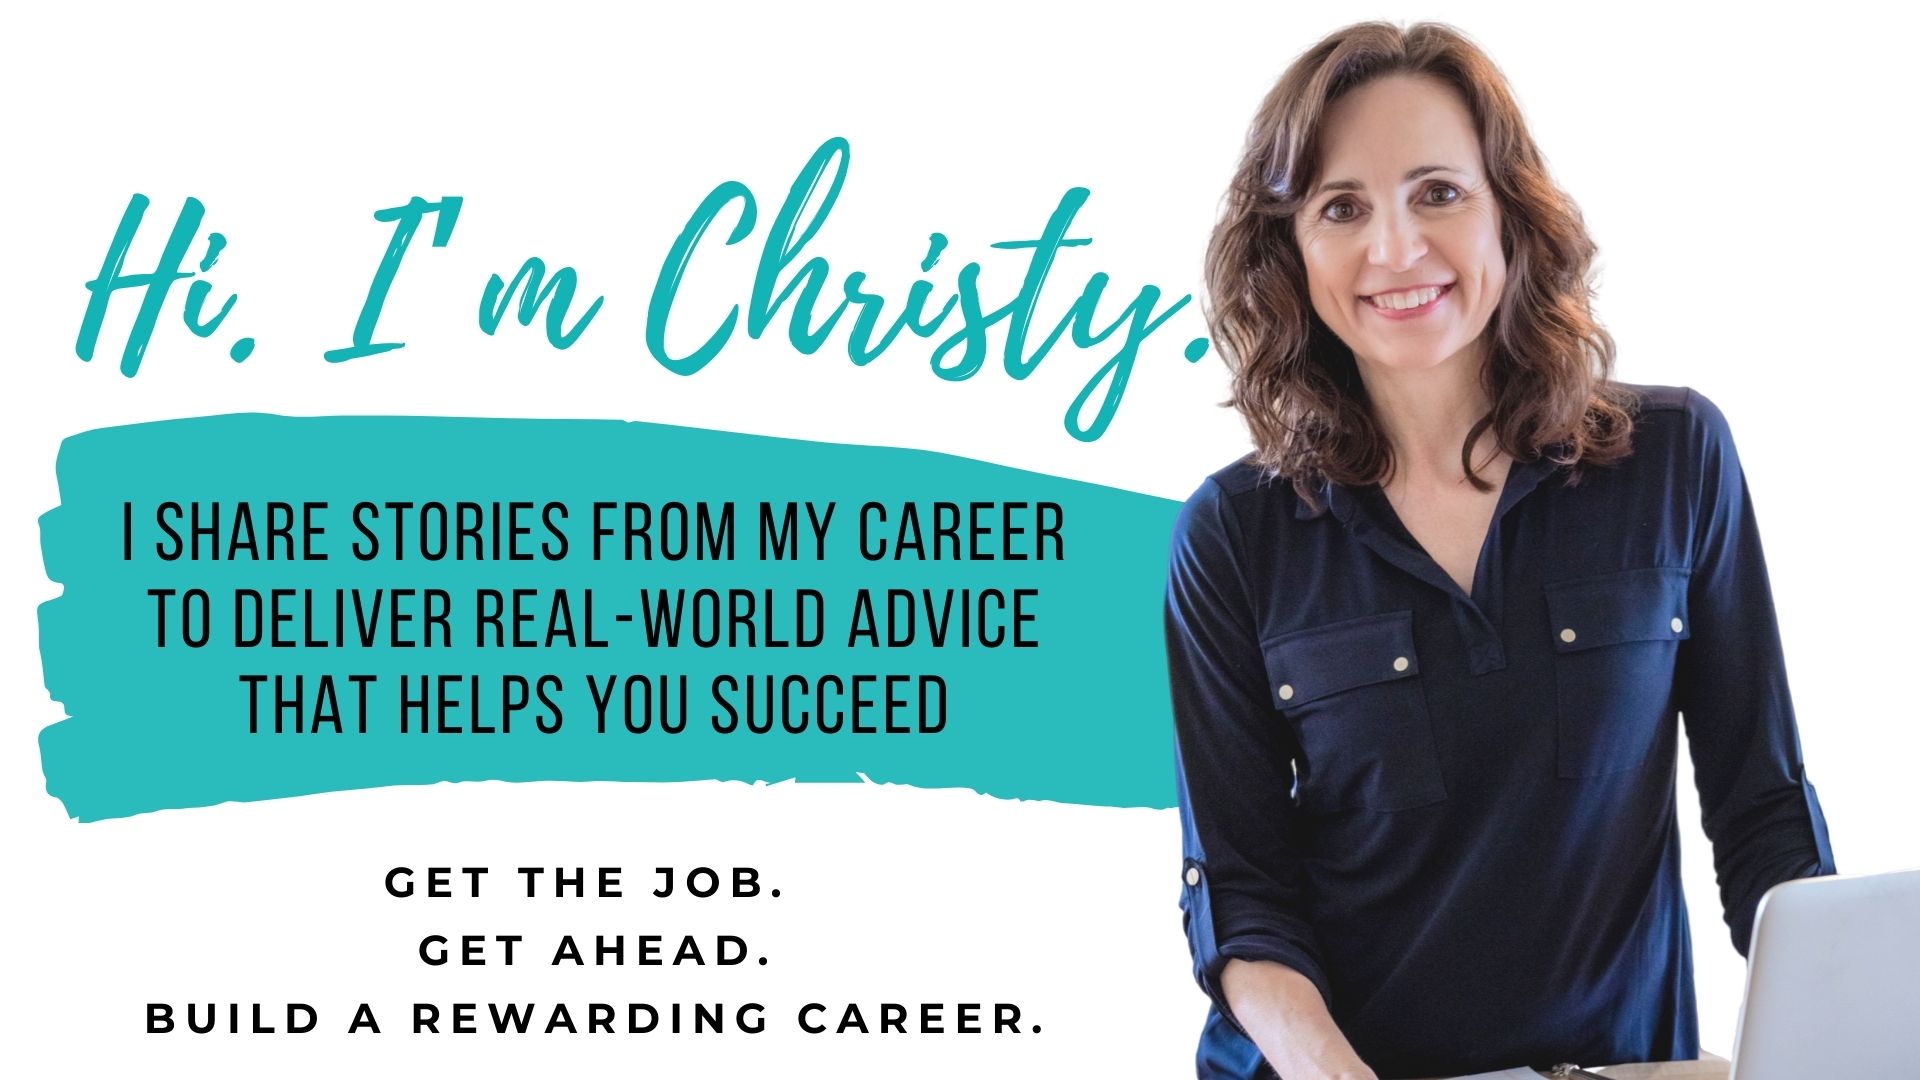 Image of Christy Noel I Share Stories from My Career to Deliver Real-World Advice that Helps You Succeed